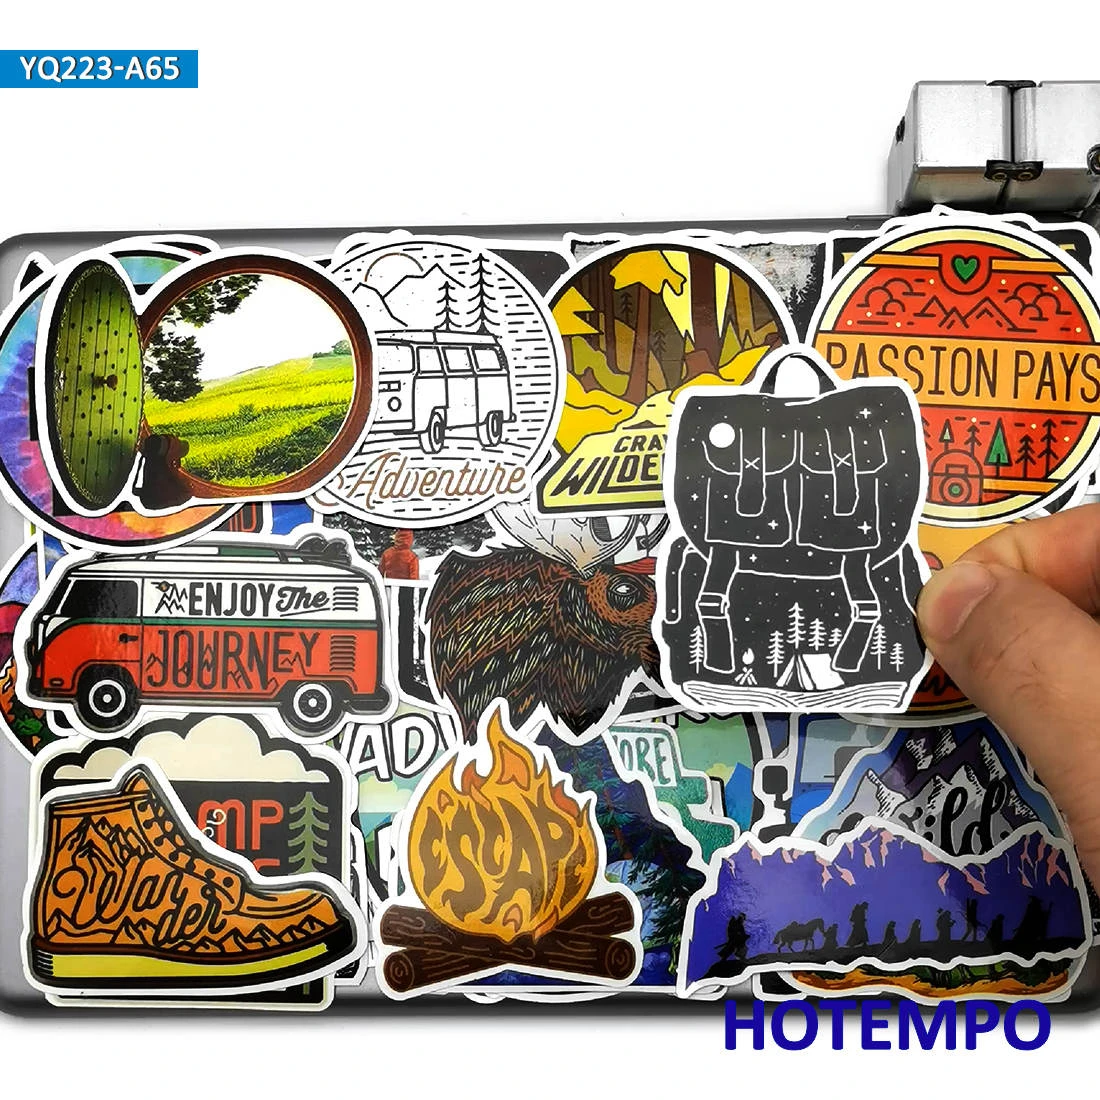 65pcs Adventure Travel Explore World Camping Outdoor Waterproof Stickers for Phone Laptop Skateboard Motorcycle Bike Car Sticker